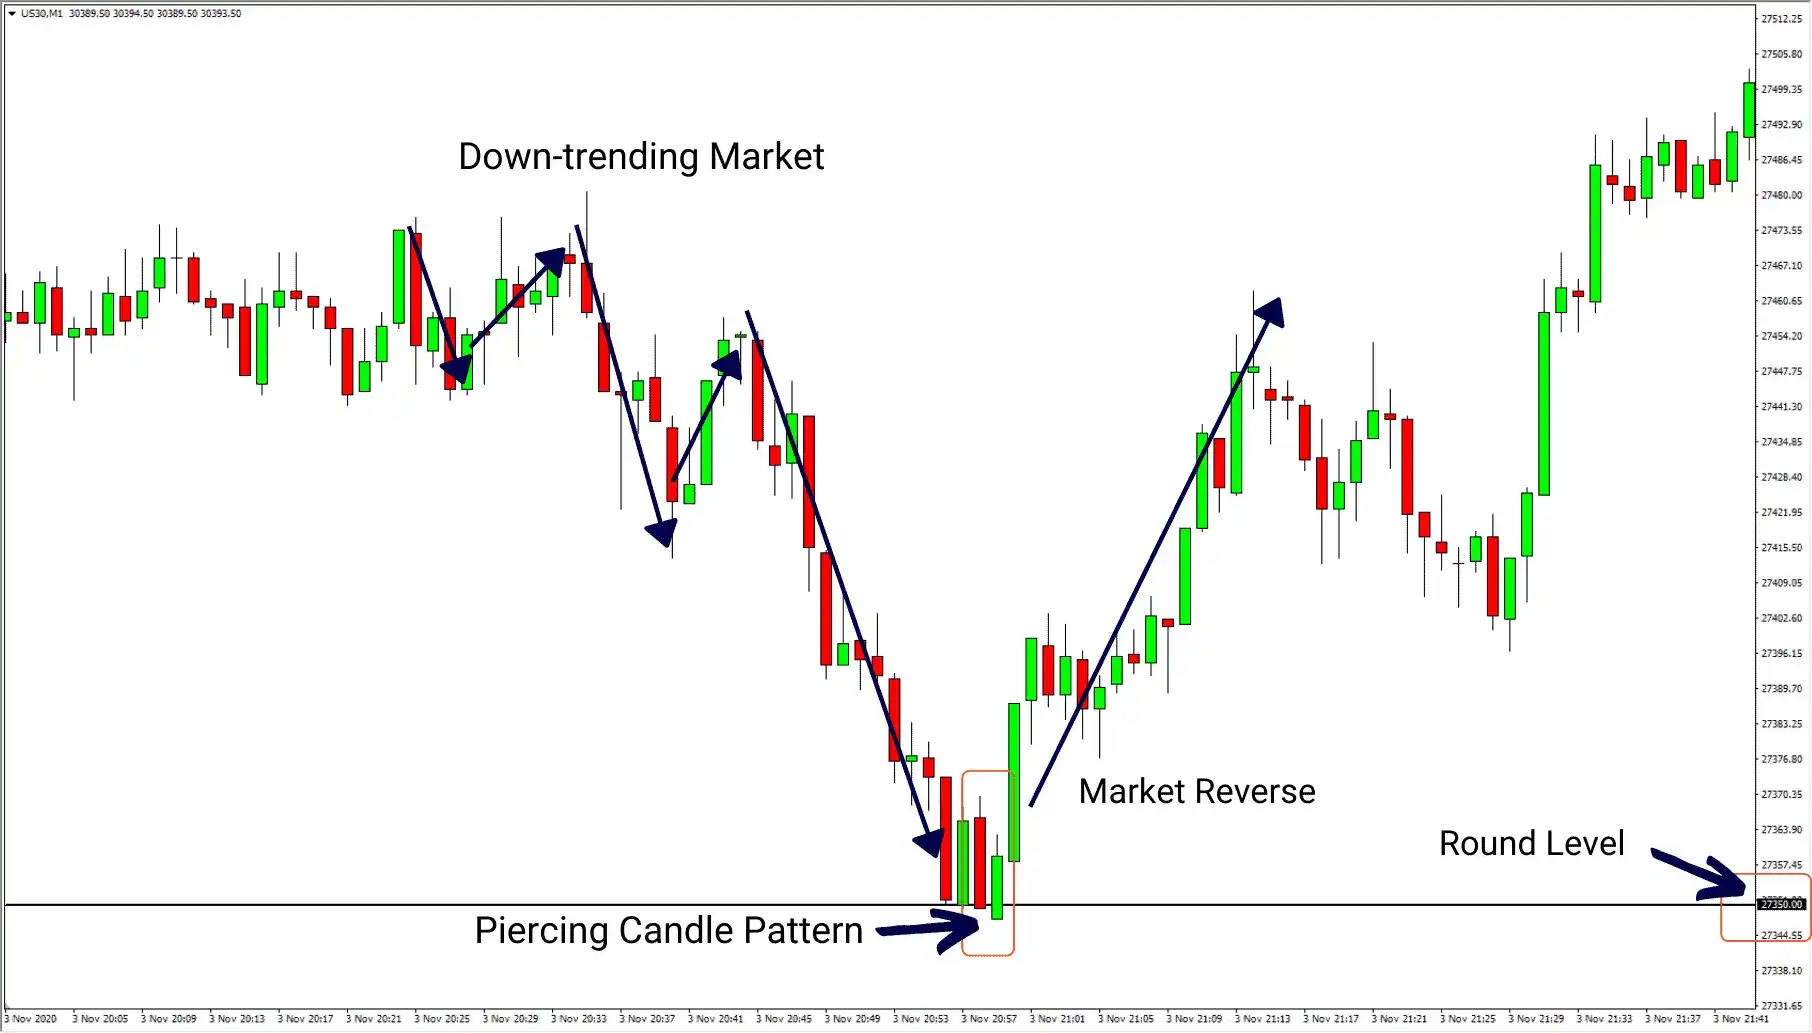 Piercing candle pattern example 1